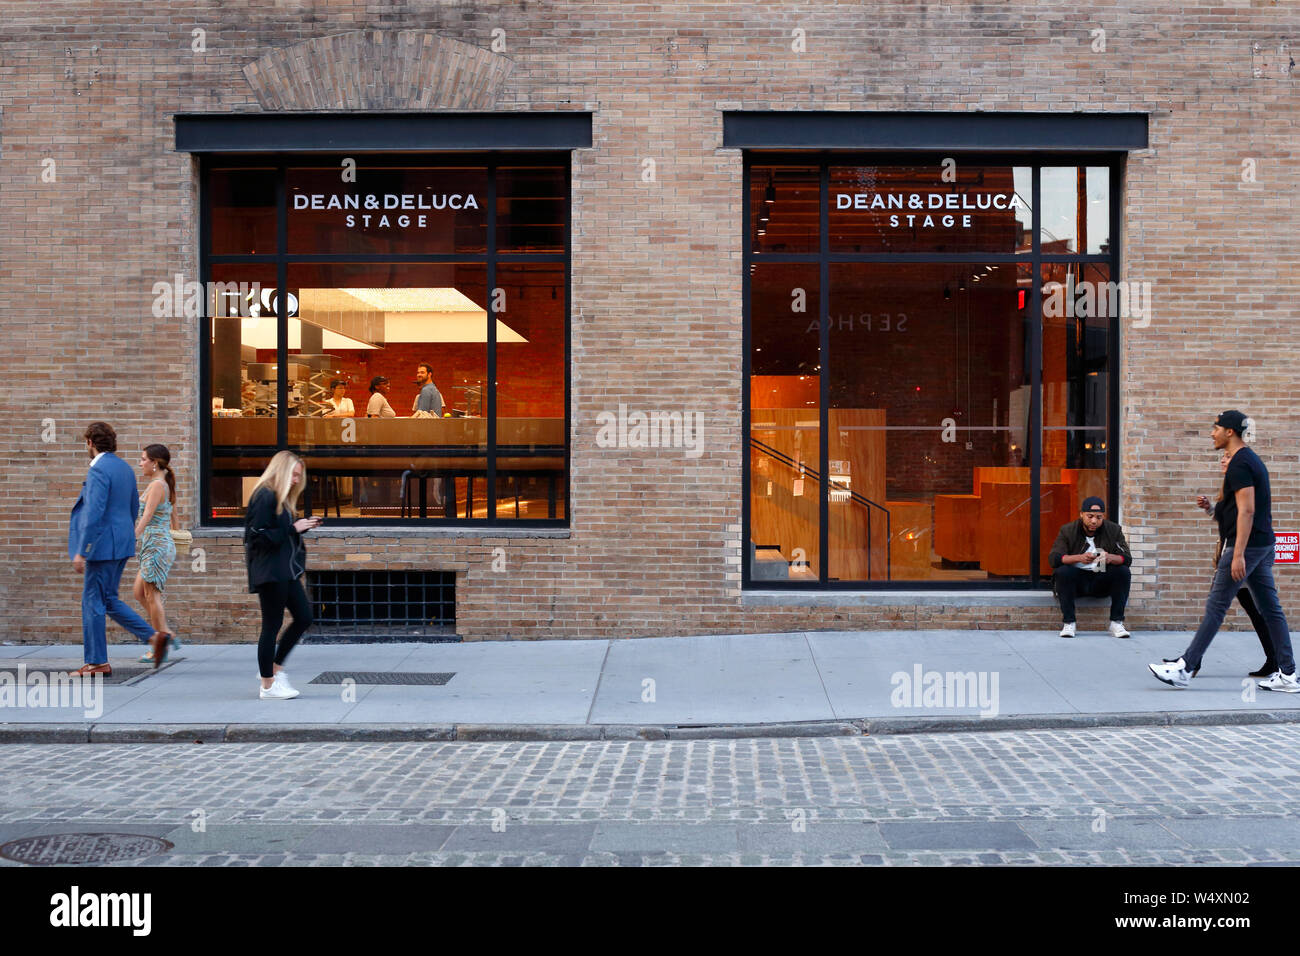 [historical storefront] Dean & DeLuca STAGE, 29 9th Ave, New York, NY Stock Photo